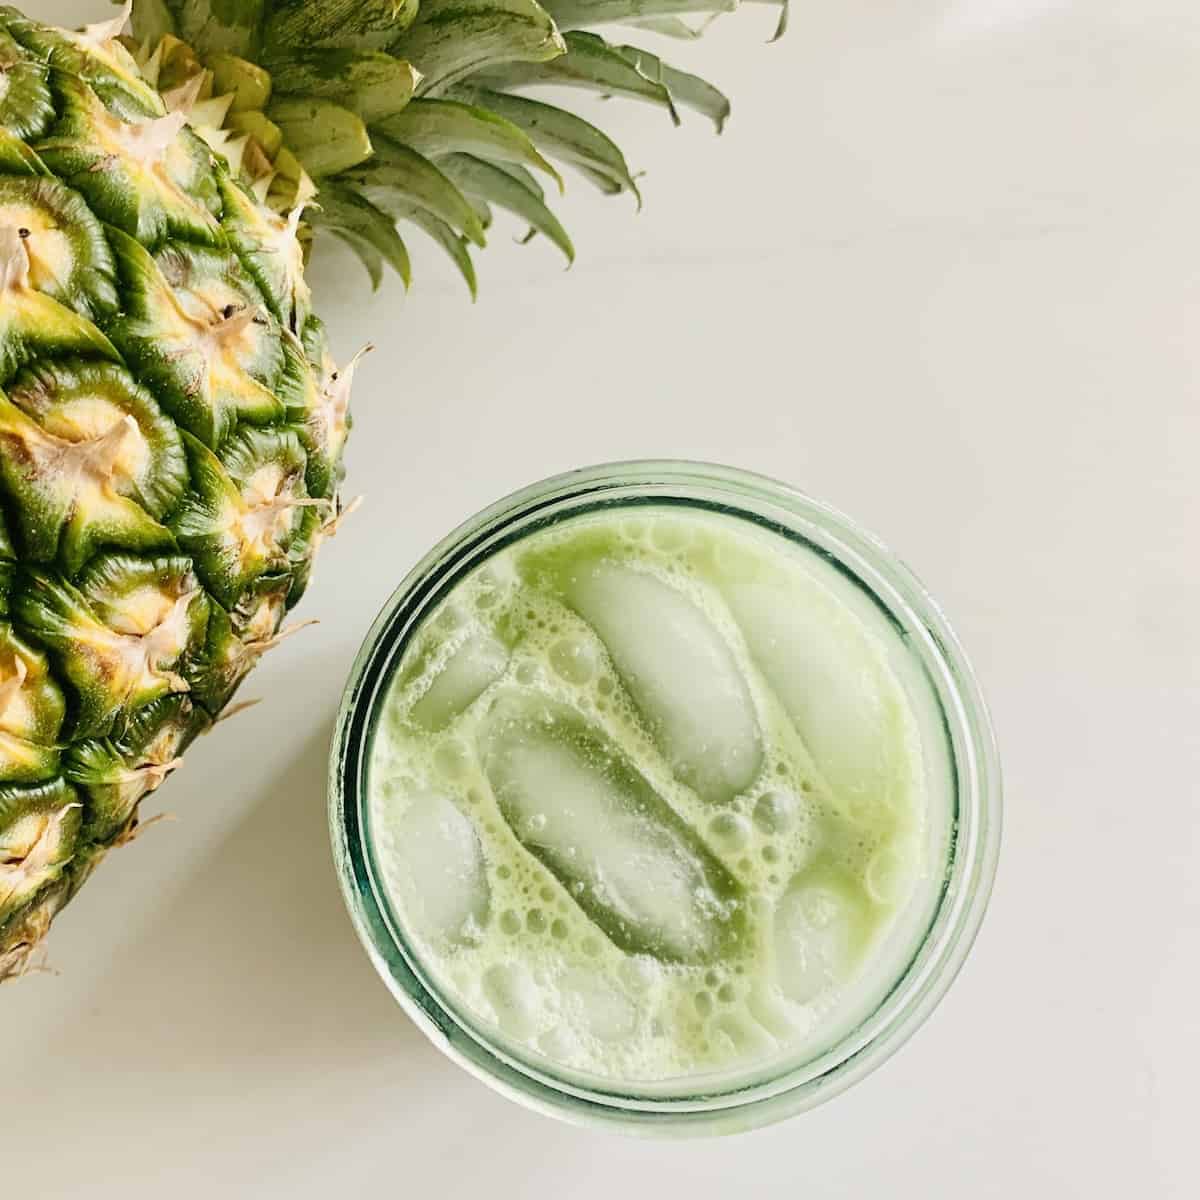 A glass of ice-cold pineapple juice with a fresh pineapple garnish, perfect for summer refreshment.